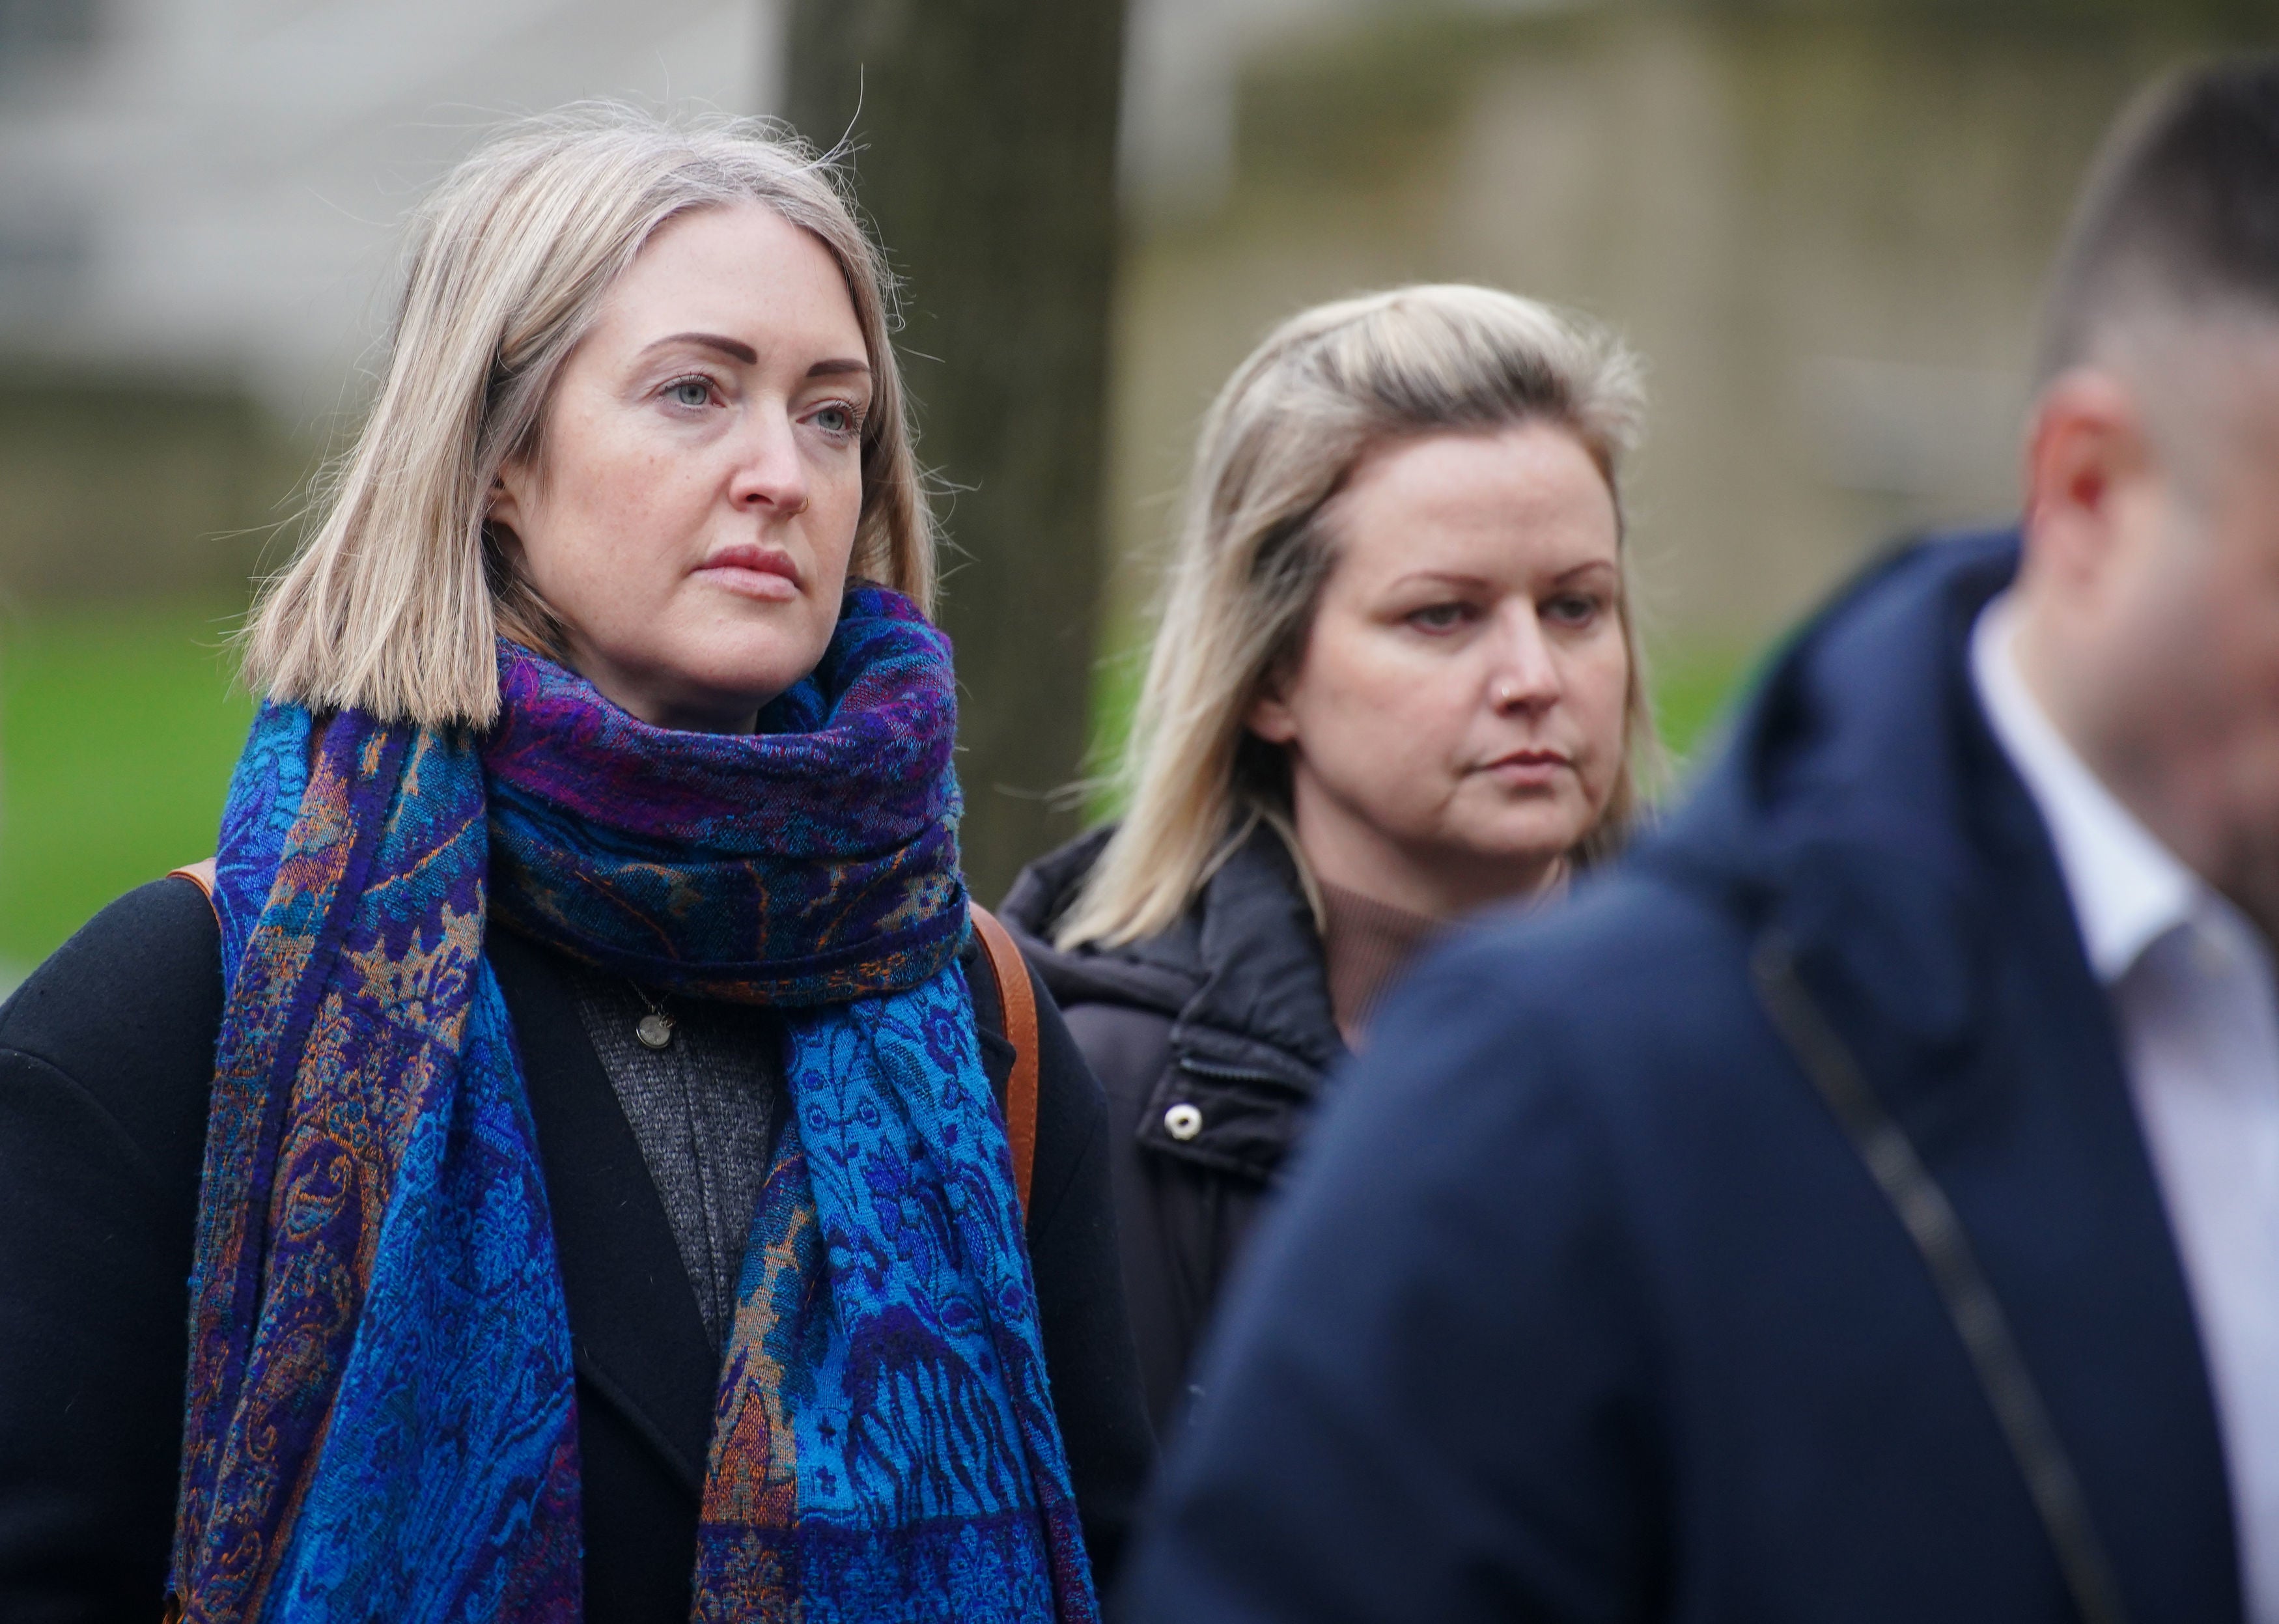 Brianna Ghey's (left) mother Esther Ghey arrives at Manchester Crown Court